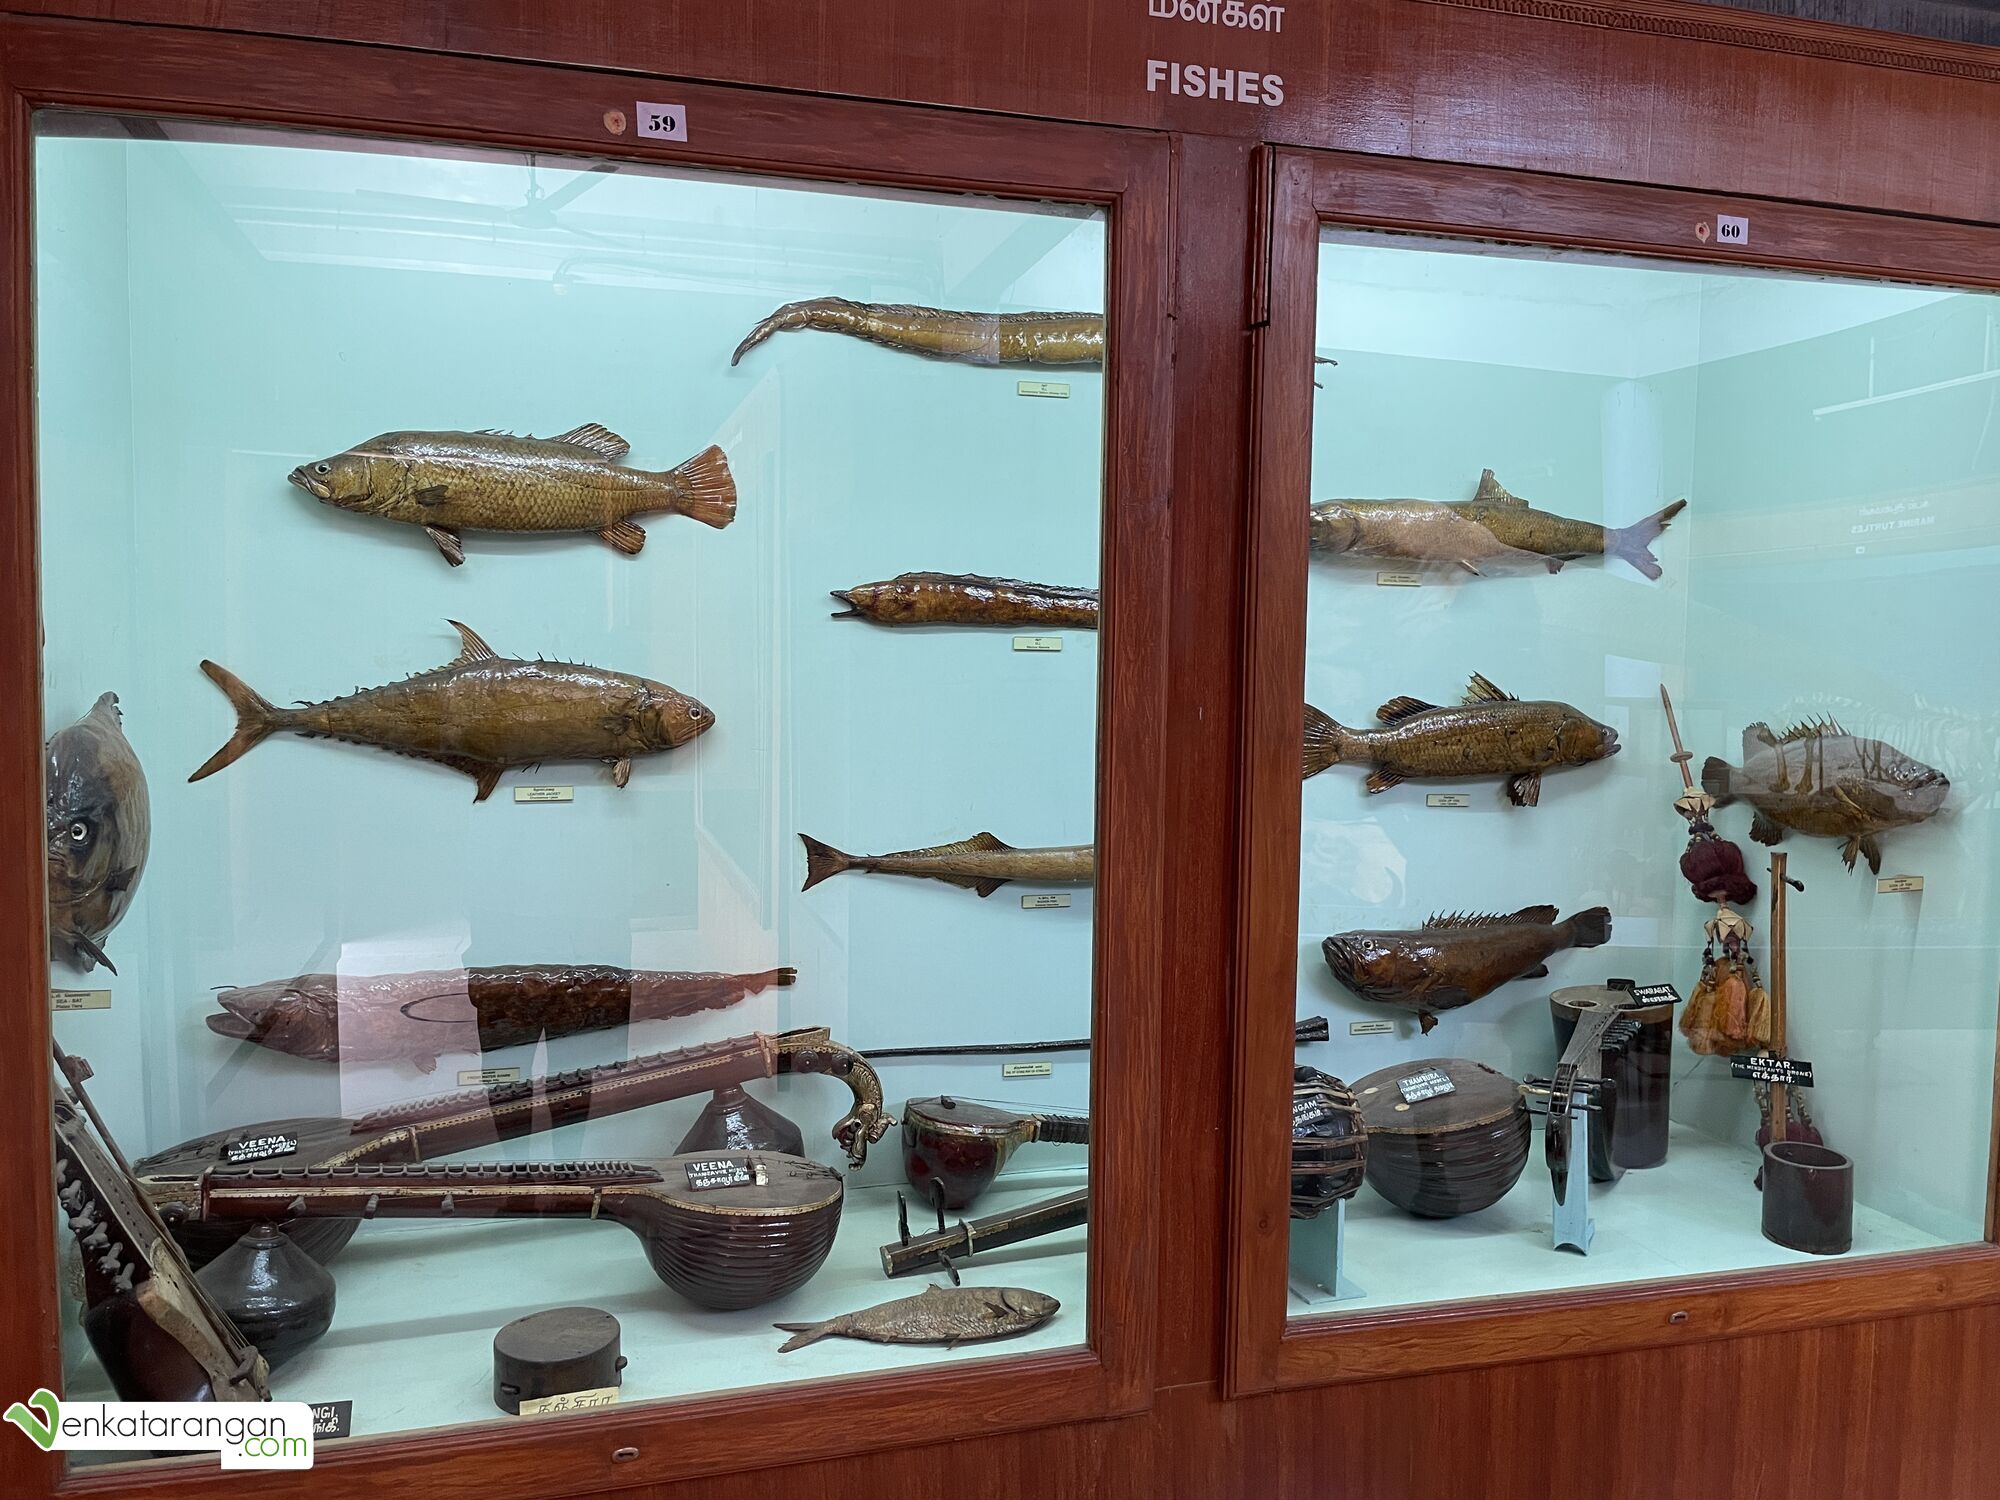 Fishes and Veena kept in the same display (மீன், வீணை) 